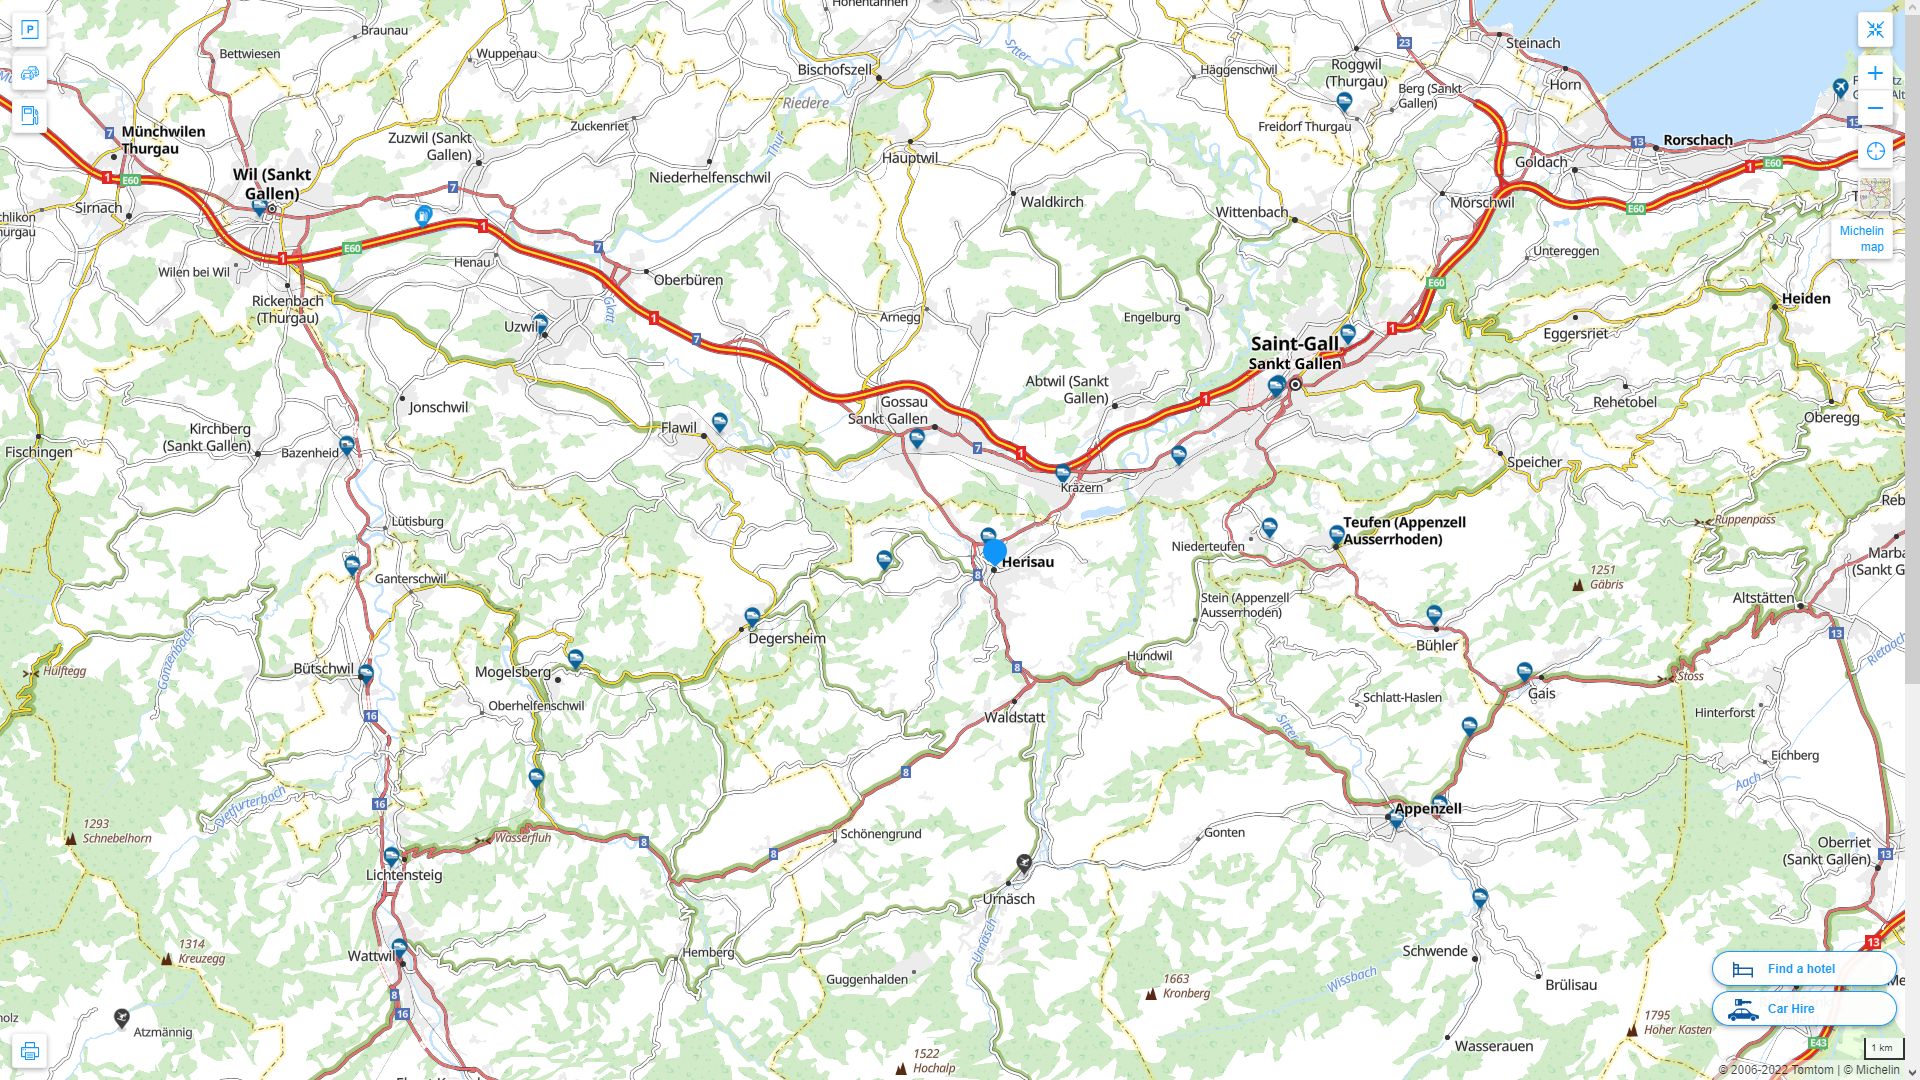 Herisau Highway and Road Map